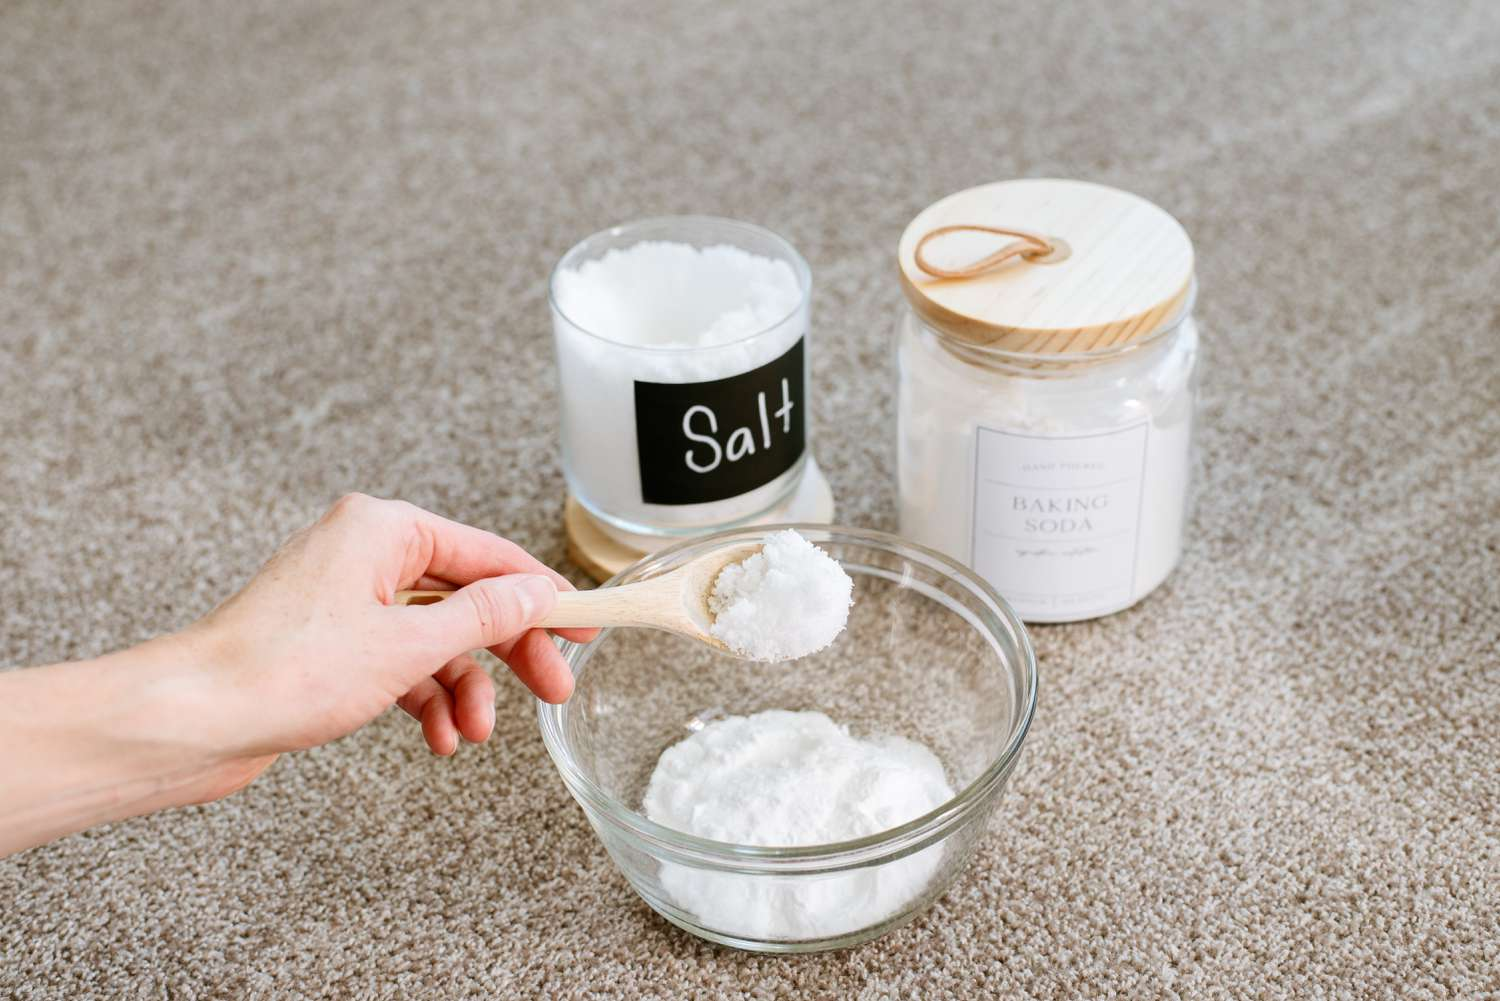 Combine baking soda and salt in a basin to clean your carpet